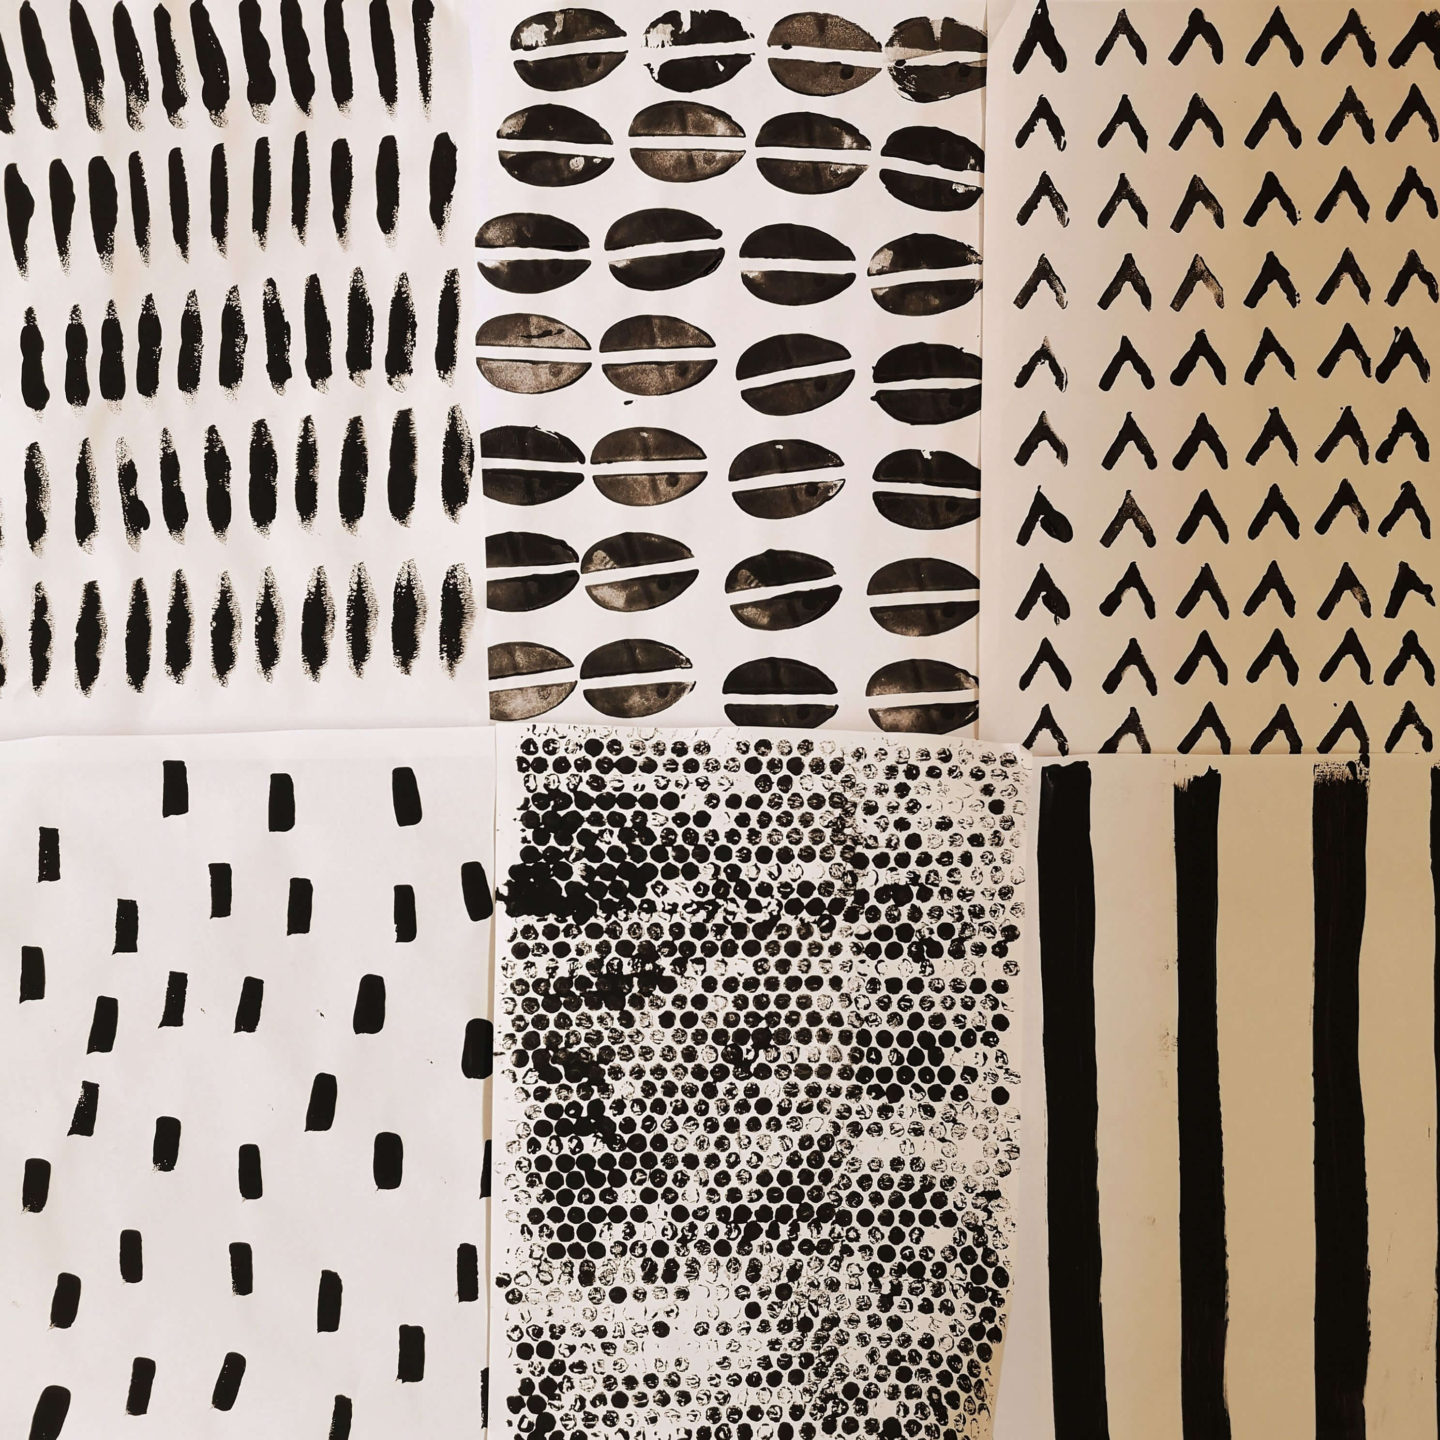 Samples of black printing on white fabric. Samples include stripes, bubble wrap print and rectangles.